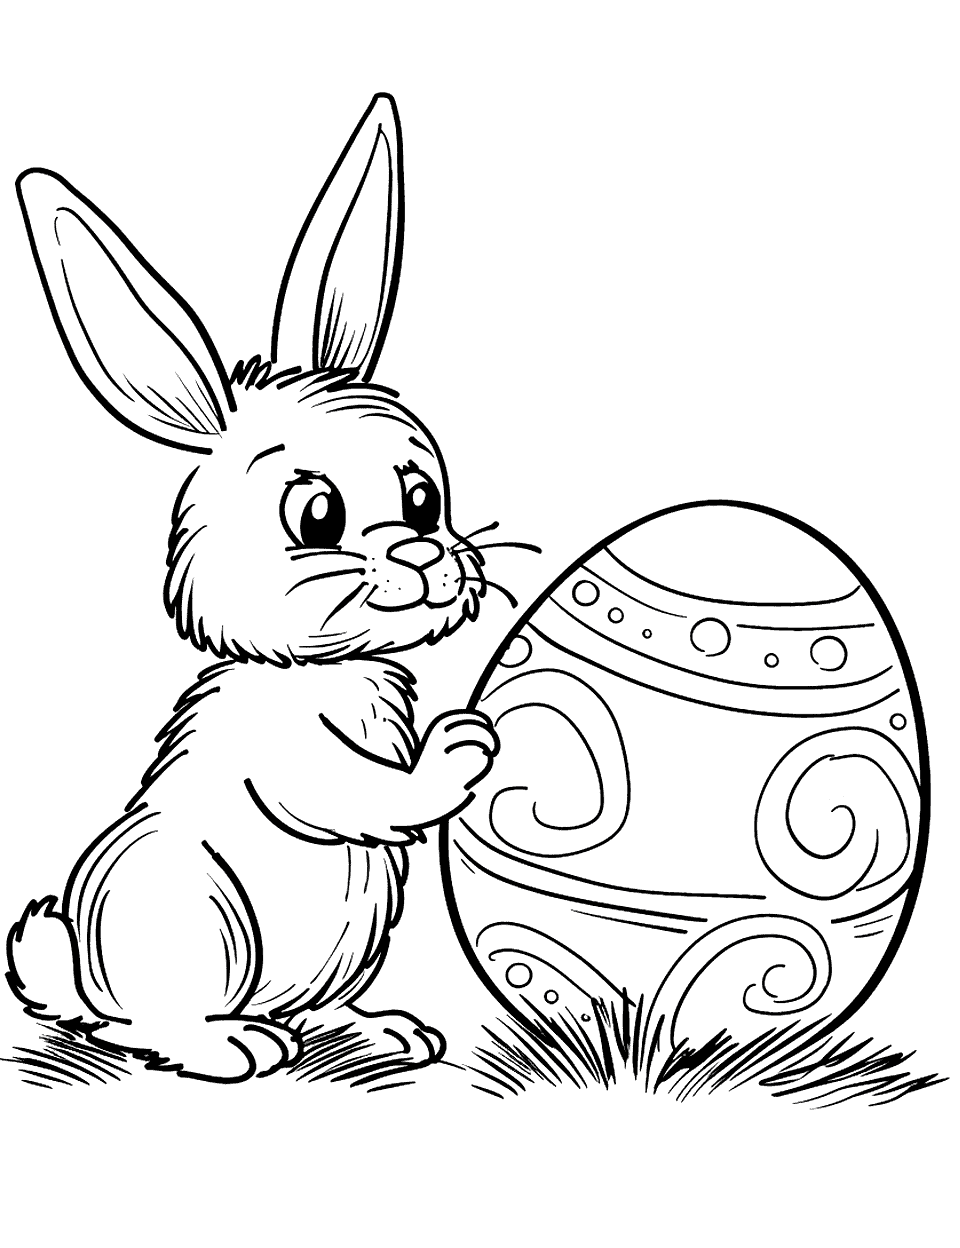 Bunny and the Big Egg Easter Coloring Page - A bunny looking at a giant Easter egg, almost the same size as the bunny, with wonder in its eyes.